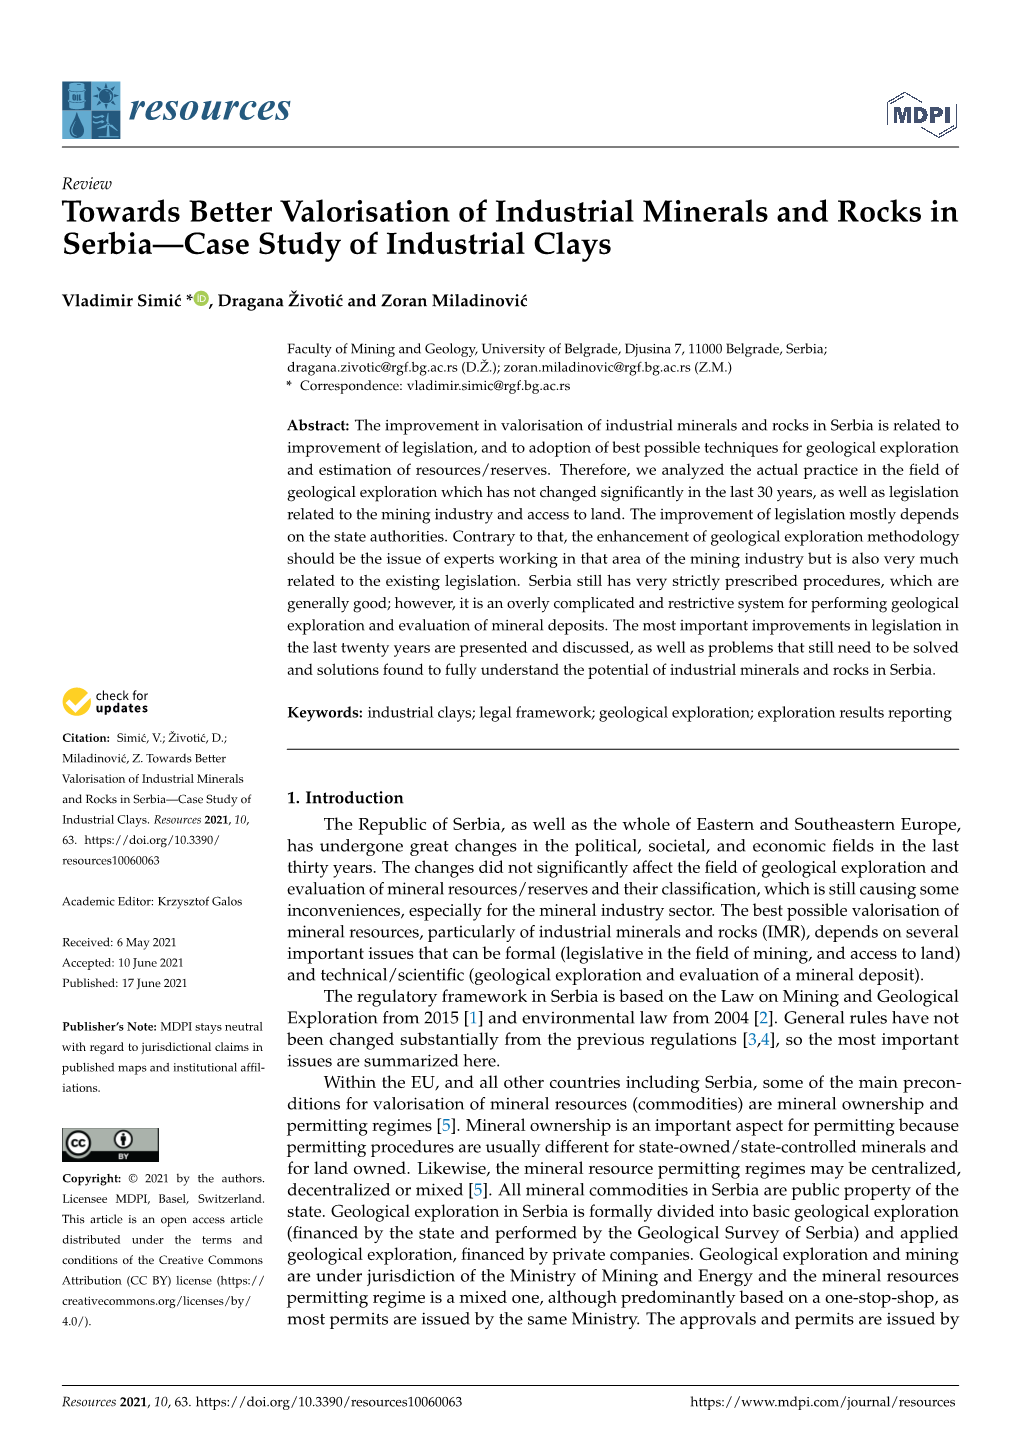 Towards Better Valorisation of Industrial Minerals and Rocks in Serbia—Case Study of Industrial Clays